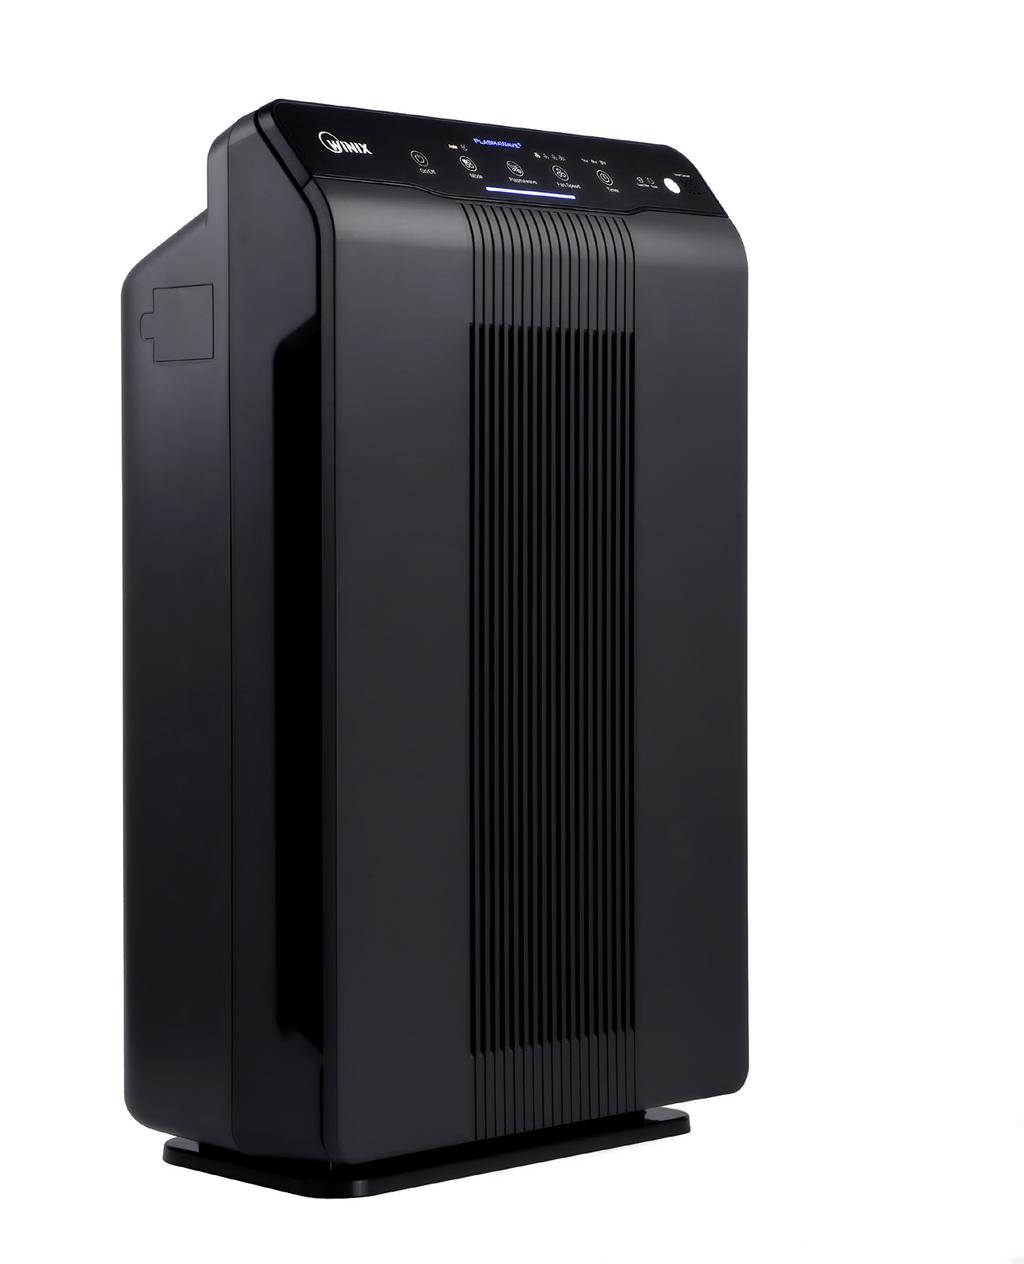 AIR PURIFIERS WINIX 5500-2 The WINIX 5500-2 Air Purifier replaces the wildly popular 5500-2 model; designed for any home environment and ready to capture Dust, Pollen, Pet Dander, Smoke, Mold Spores,